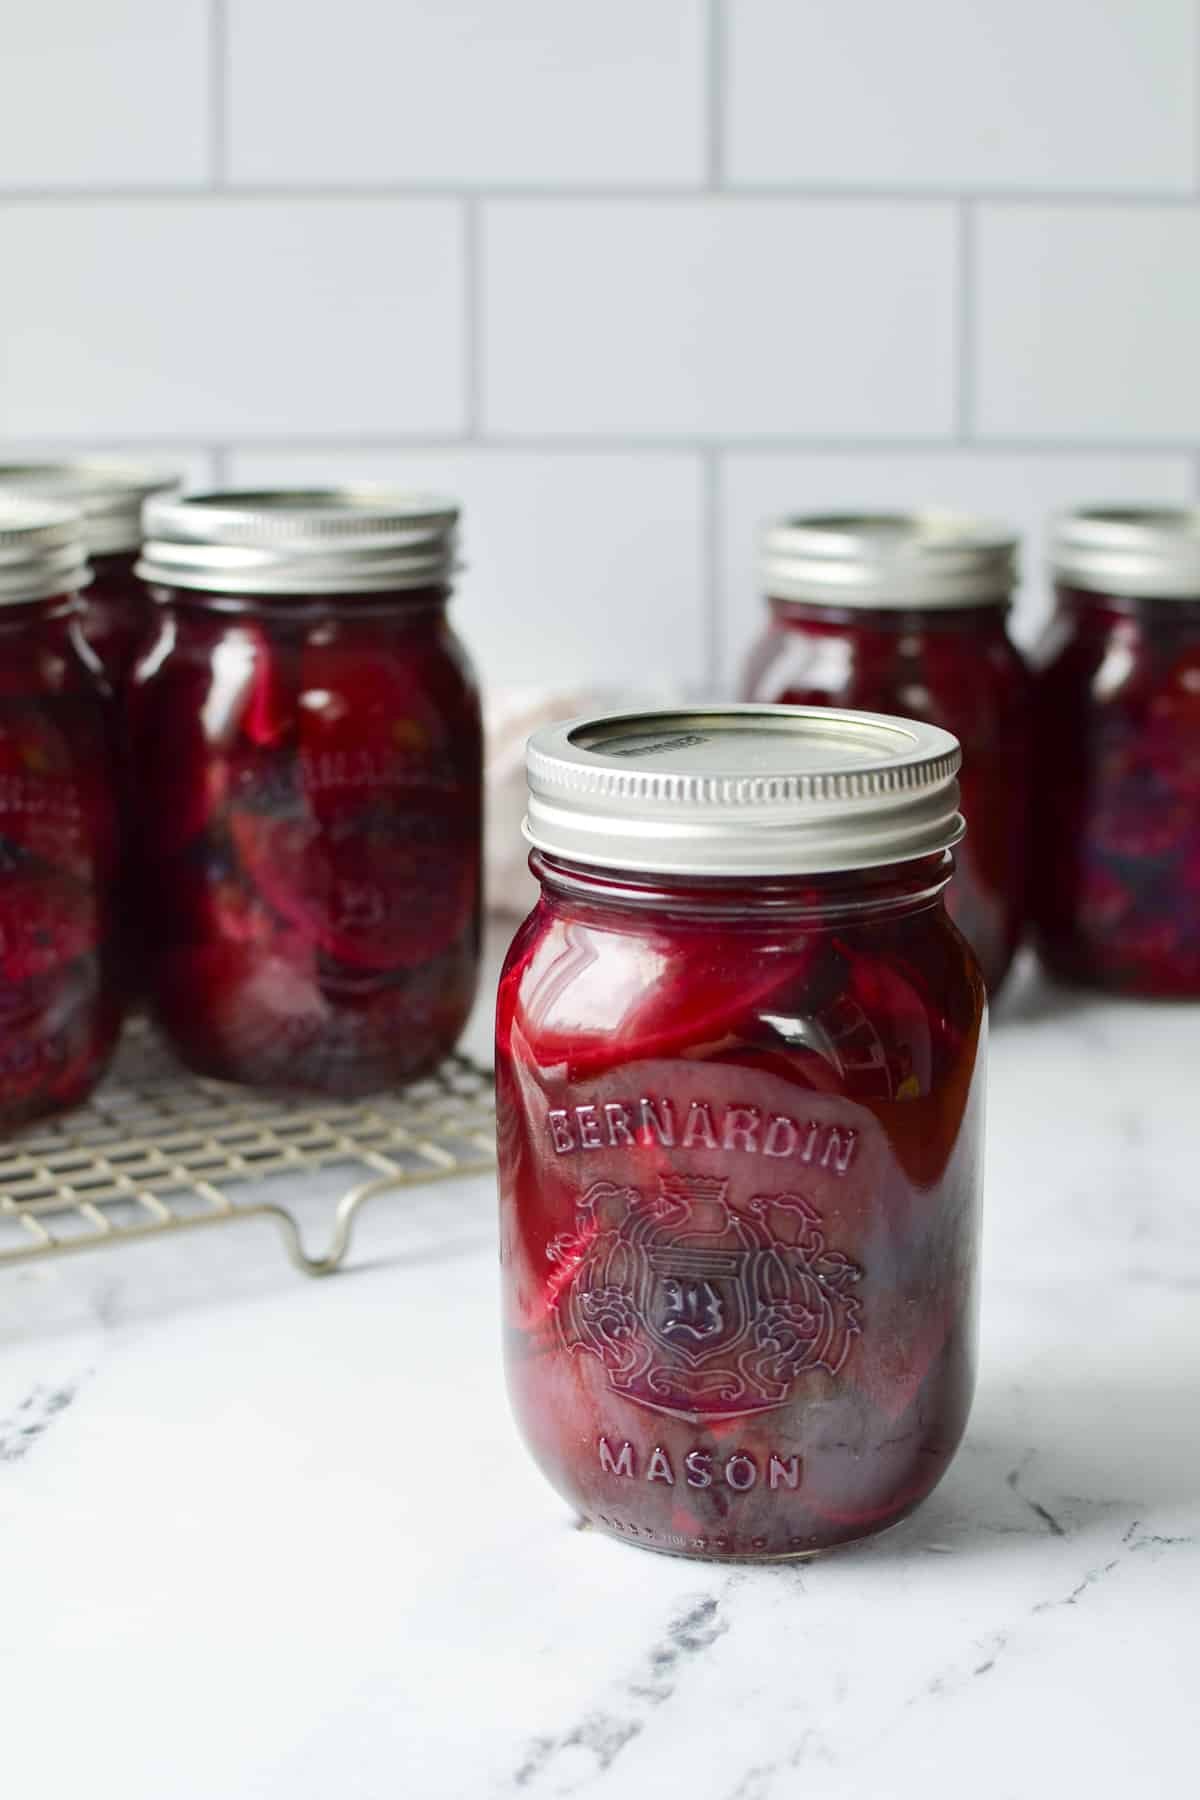 A jar of canned beets with other jars in the background.